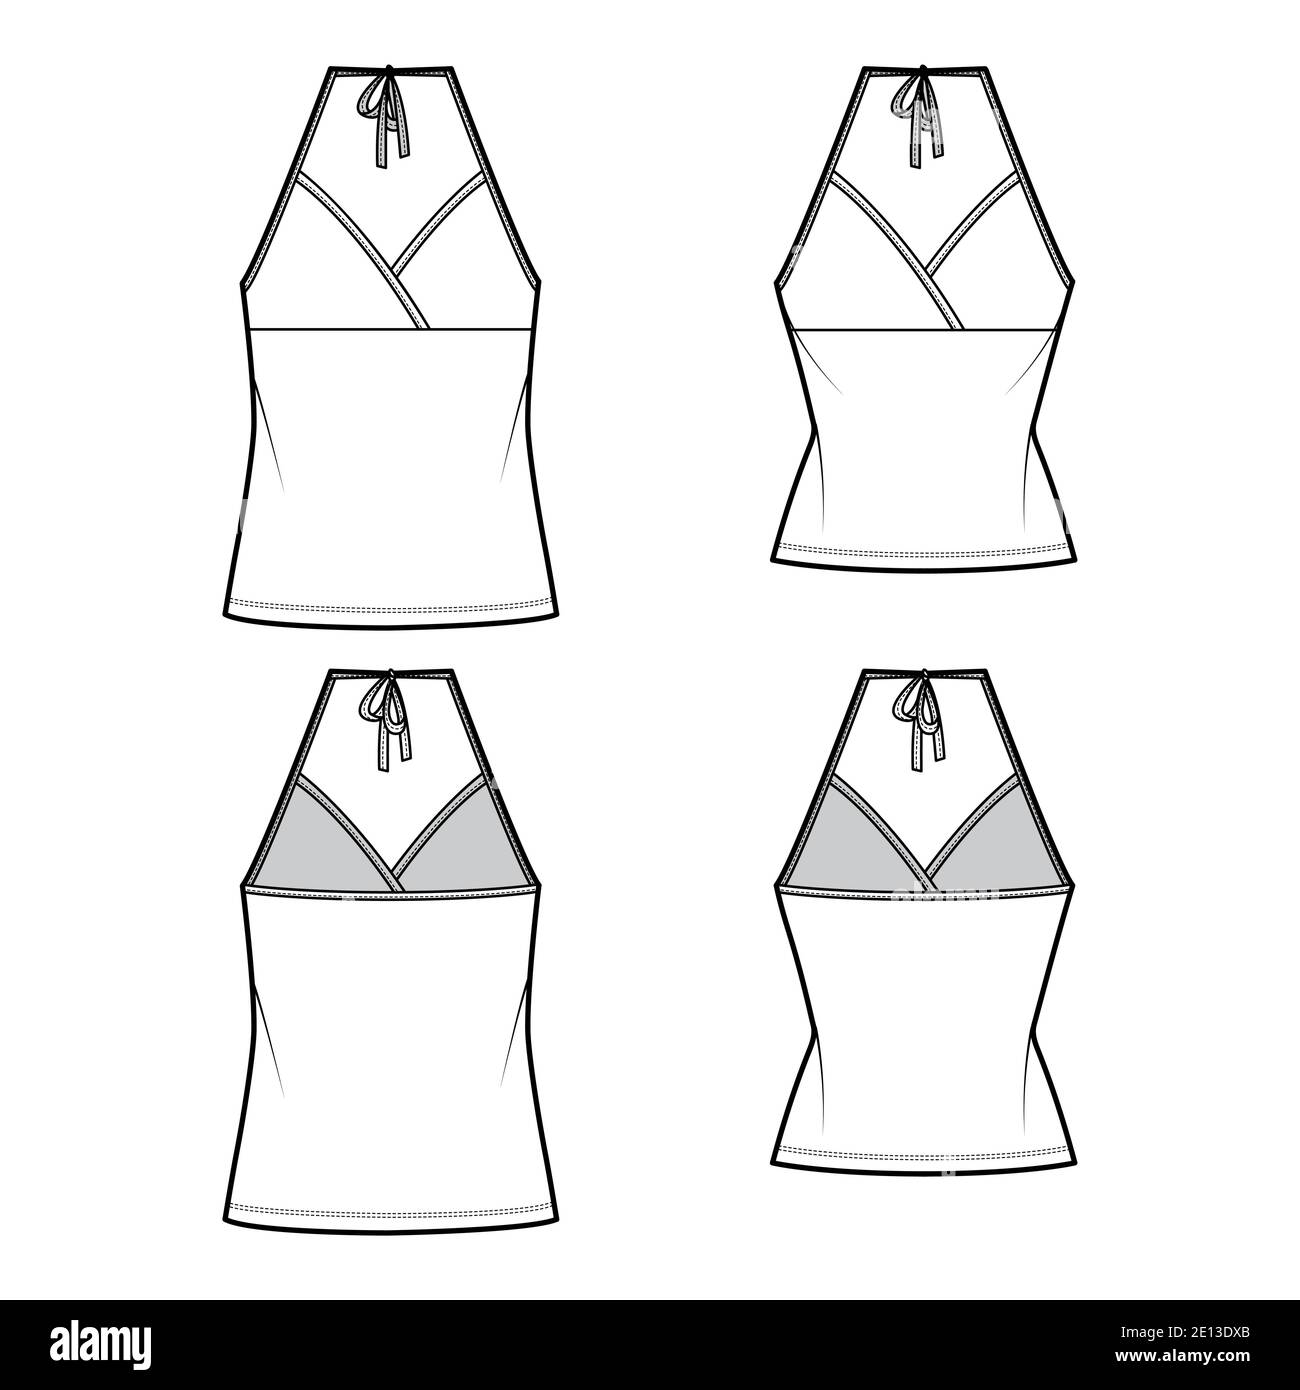 Set of Camisoles halter neck surplice tanks technical fashion illustration with empire seam, bow, slim, oversized fit, tunic length. Flat top template front, back, white color. Women men CAD mockup Stock Vector